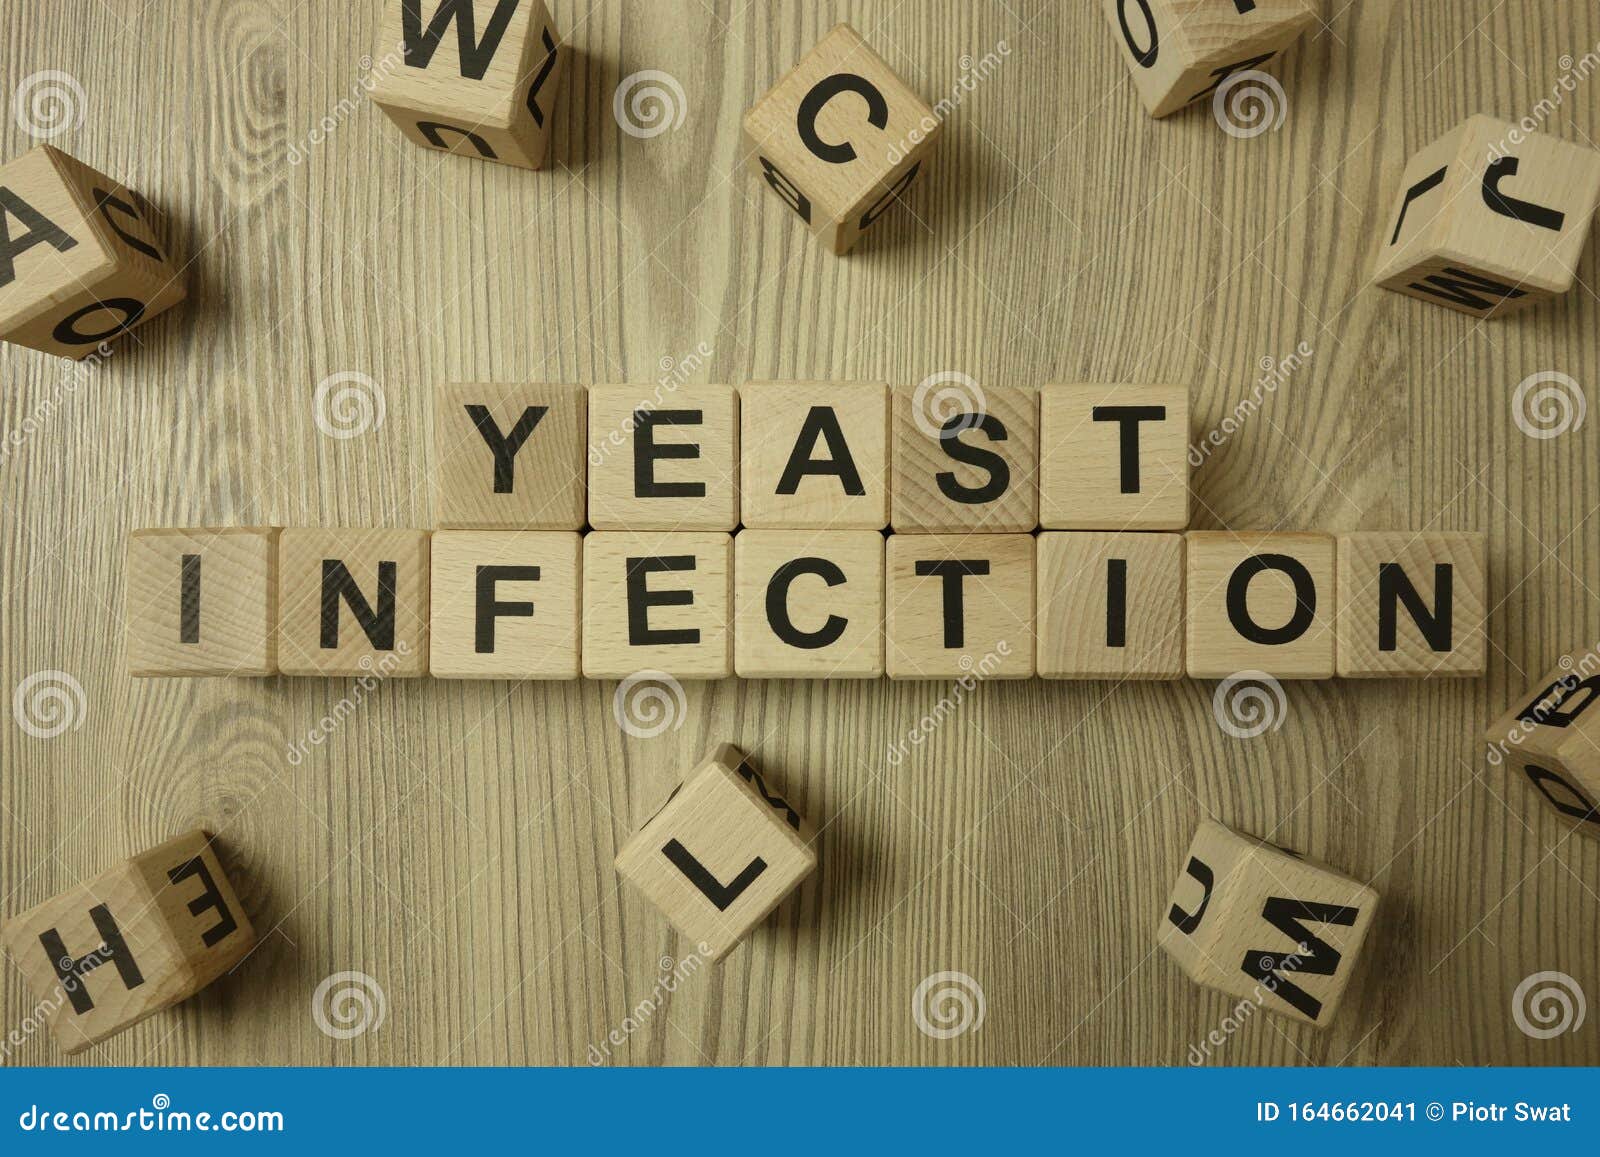 text yeast infection from wooden blocks